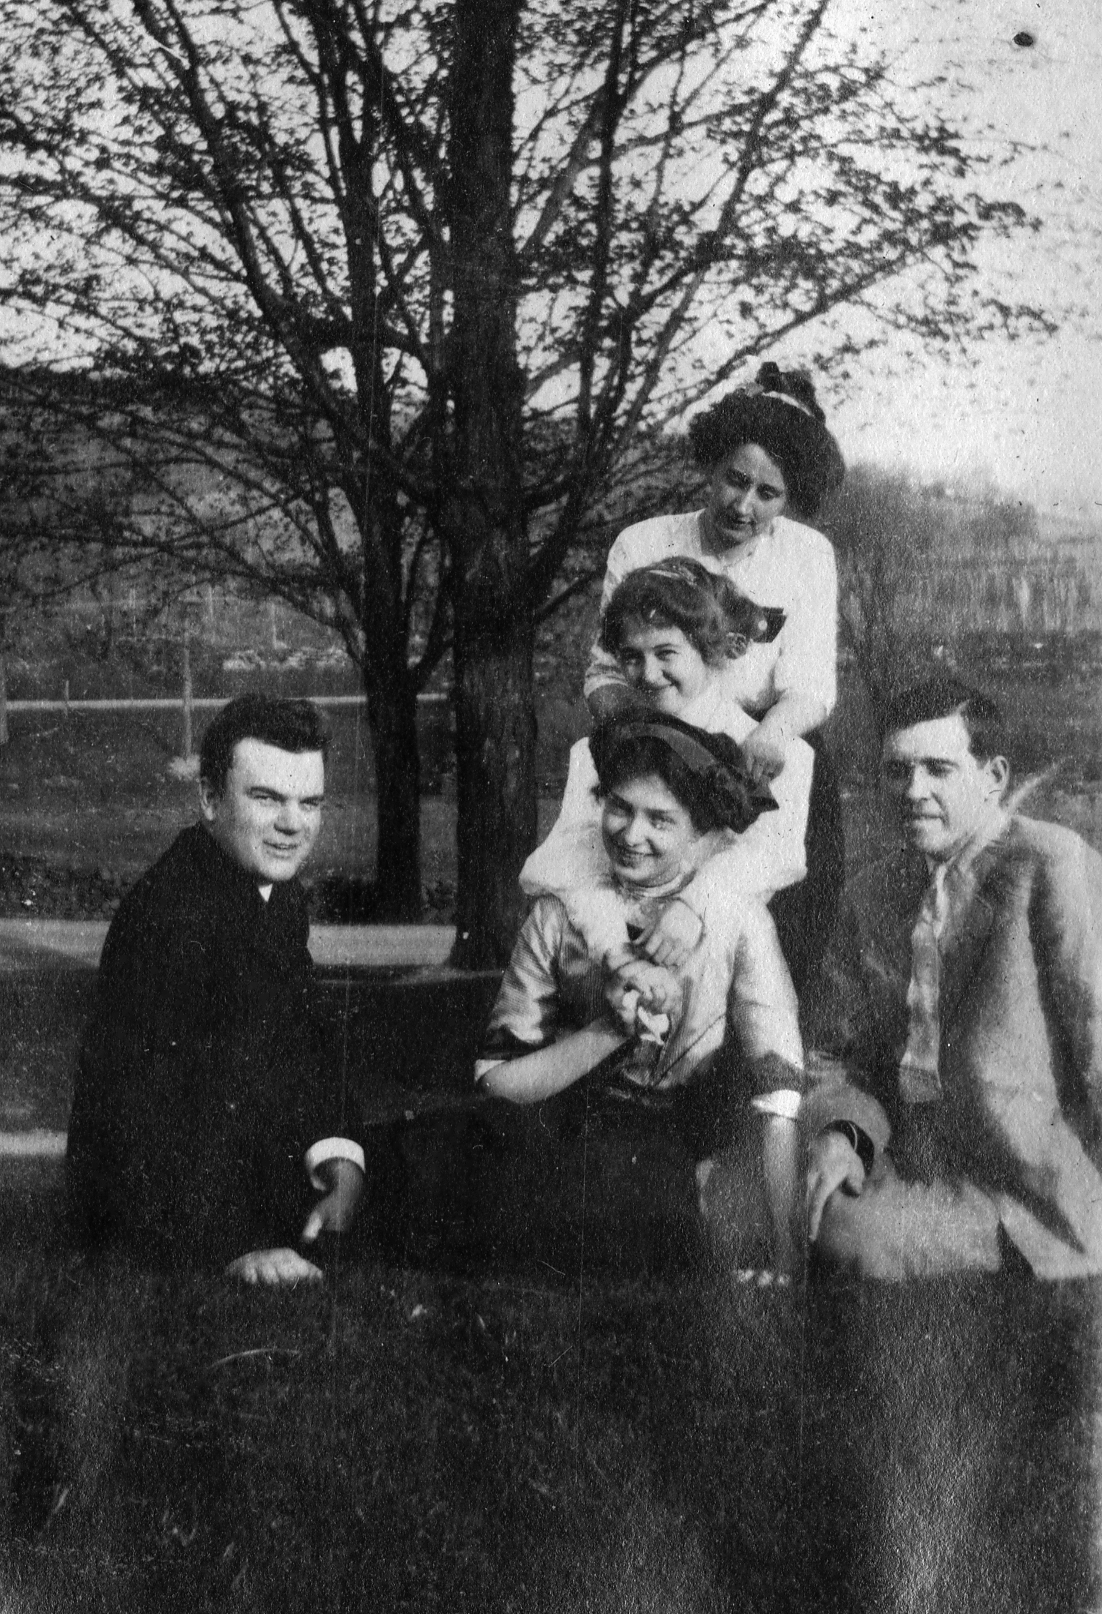 an old black and white po shows four people sitting on the ground